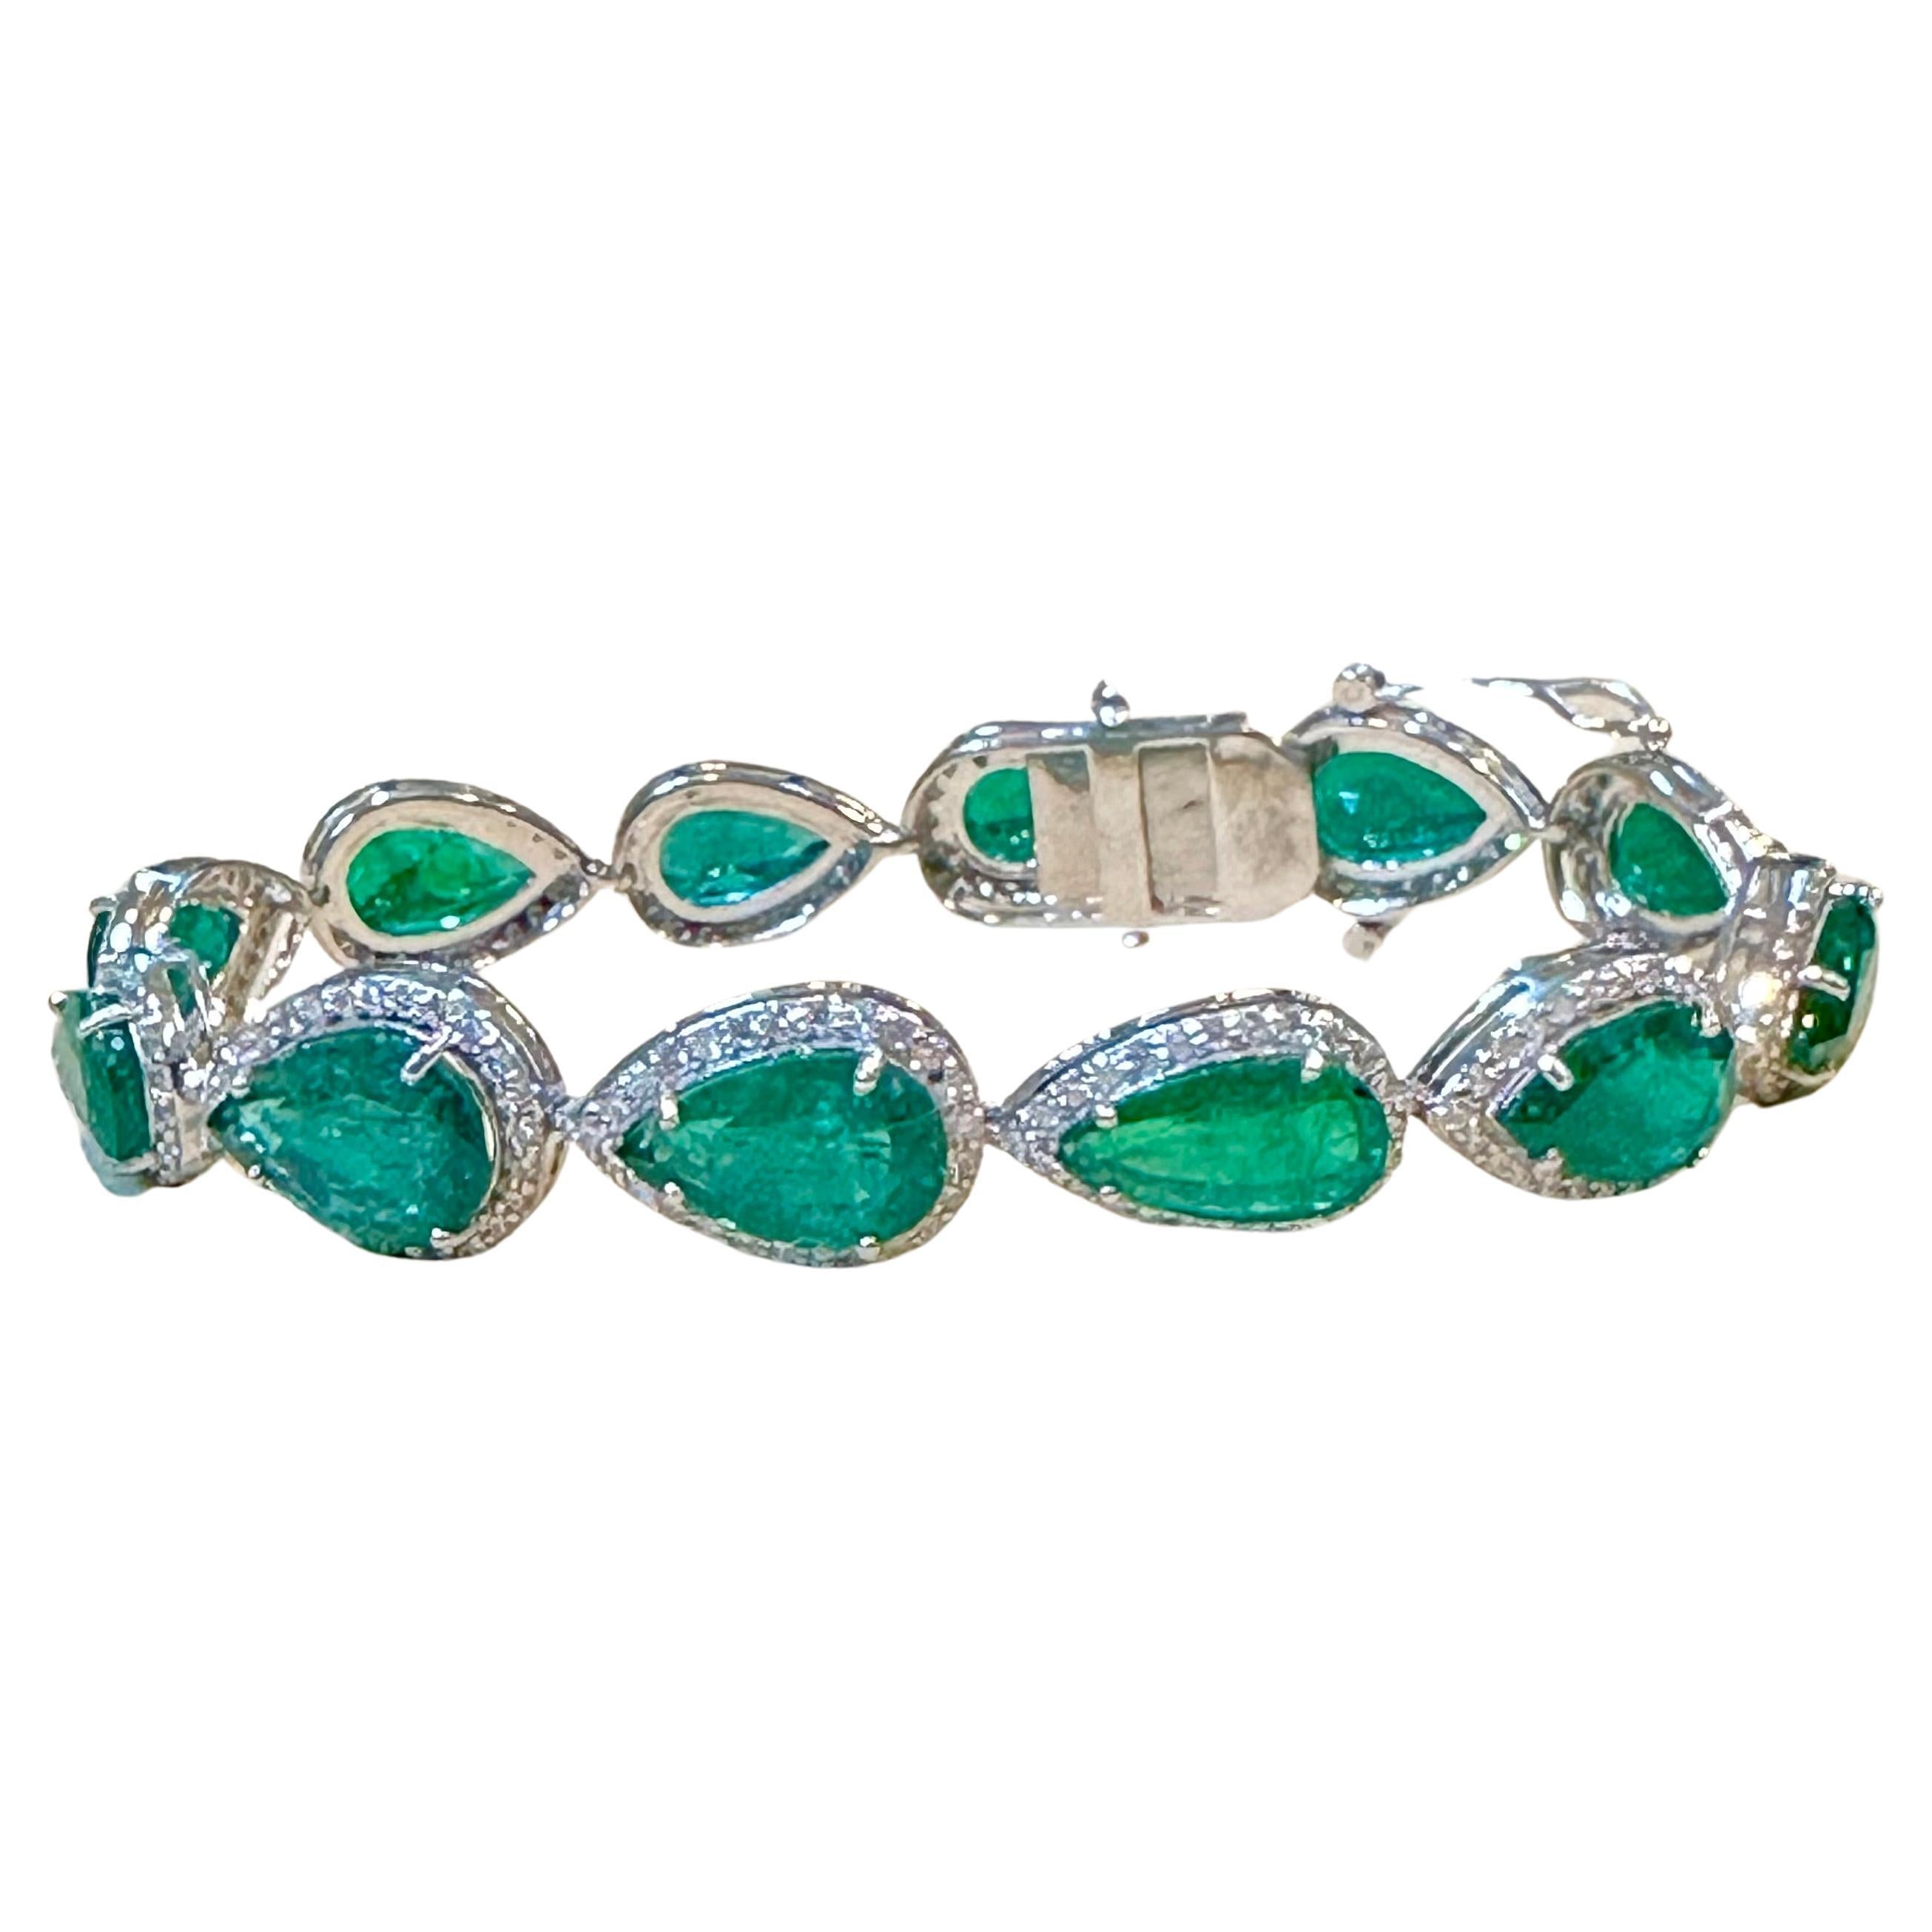 28 Carat Natural Zambian Emerald & Diamond Tennis Bracelet 14 Karat White Gold
 This exceptionally Beautiful Tennis  bracelet has  12 stones of large natural Pear shape  Emeralds  . Each Emerald is surrounded by brilliant  cut round diamond . Total